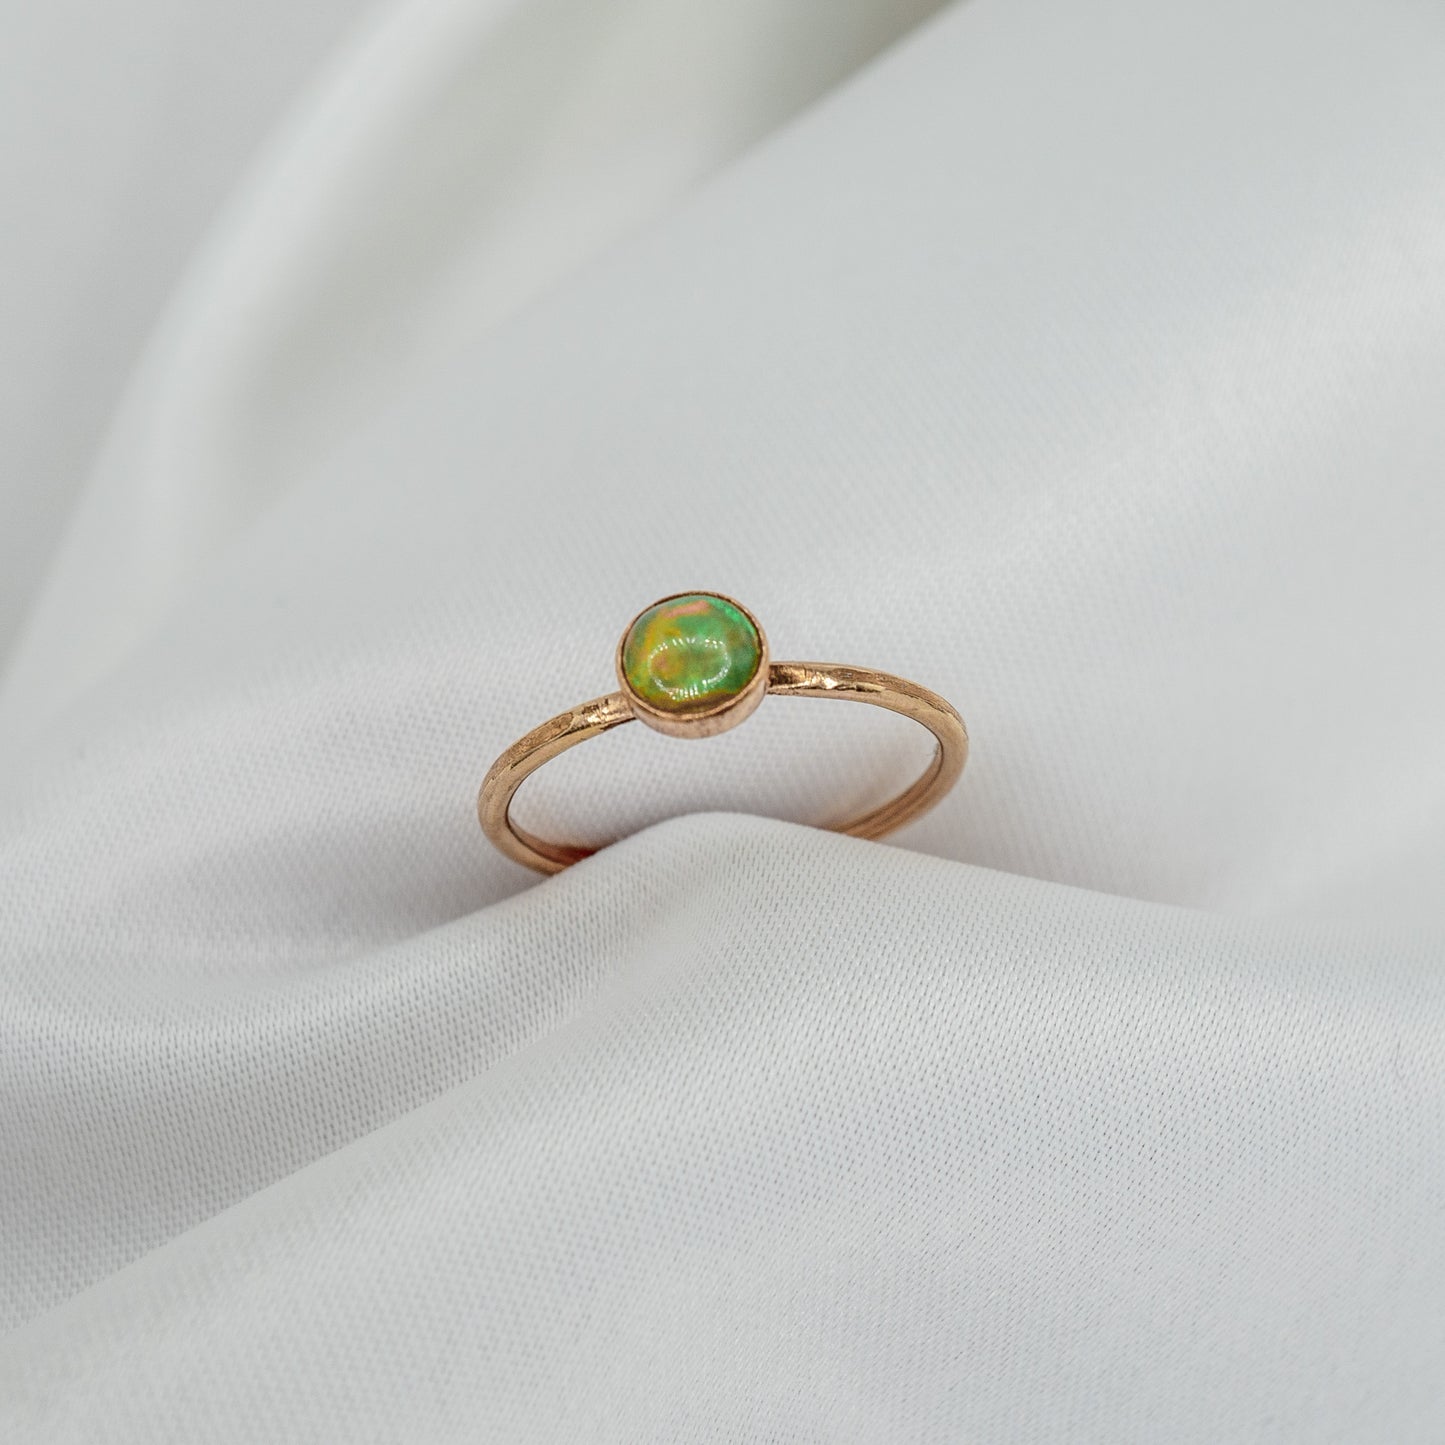 Gold Filled Opal Ring - shot on white - top view